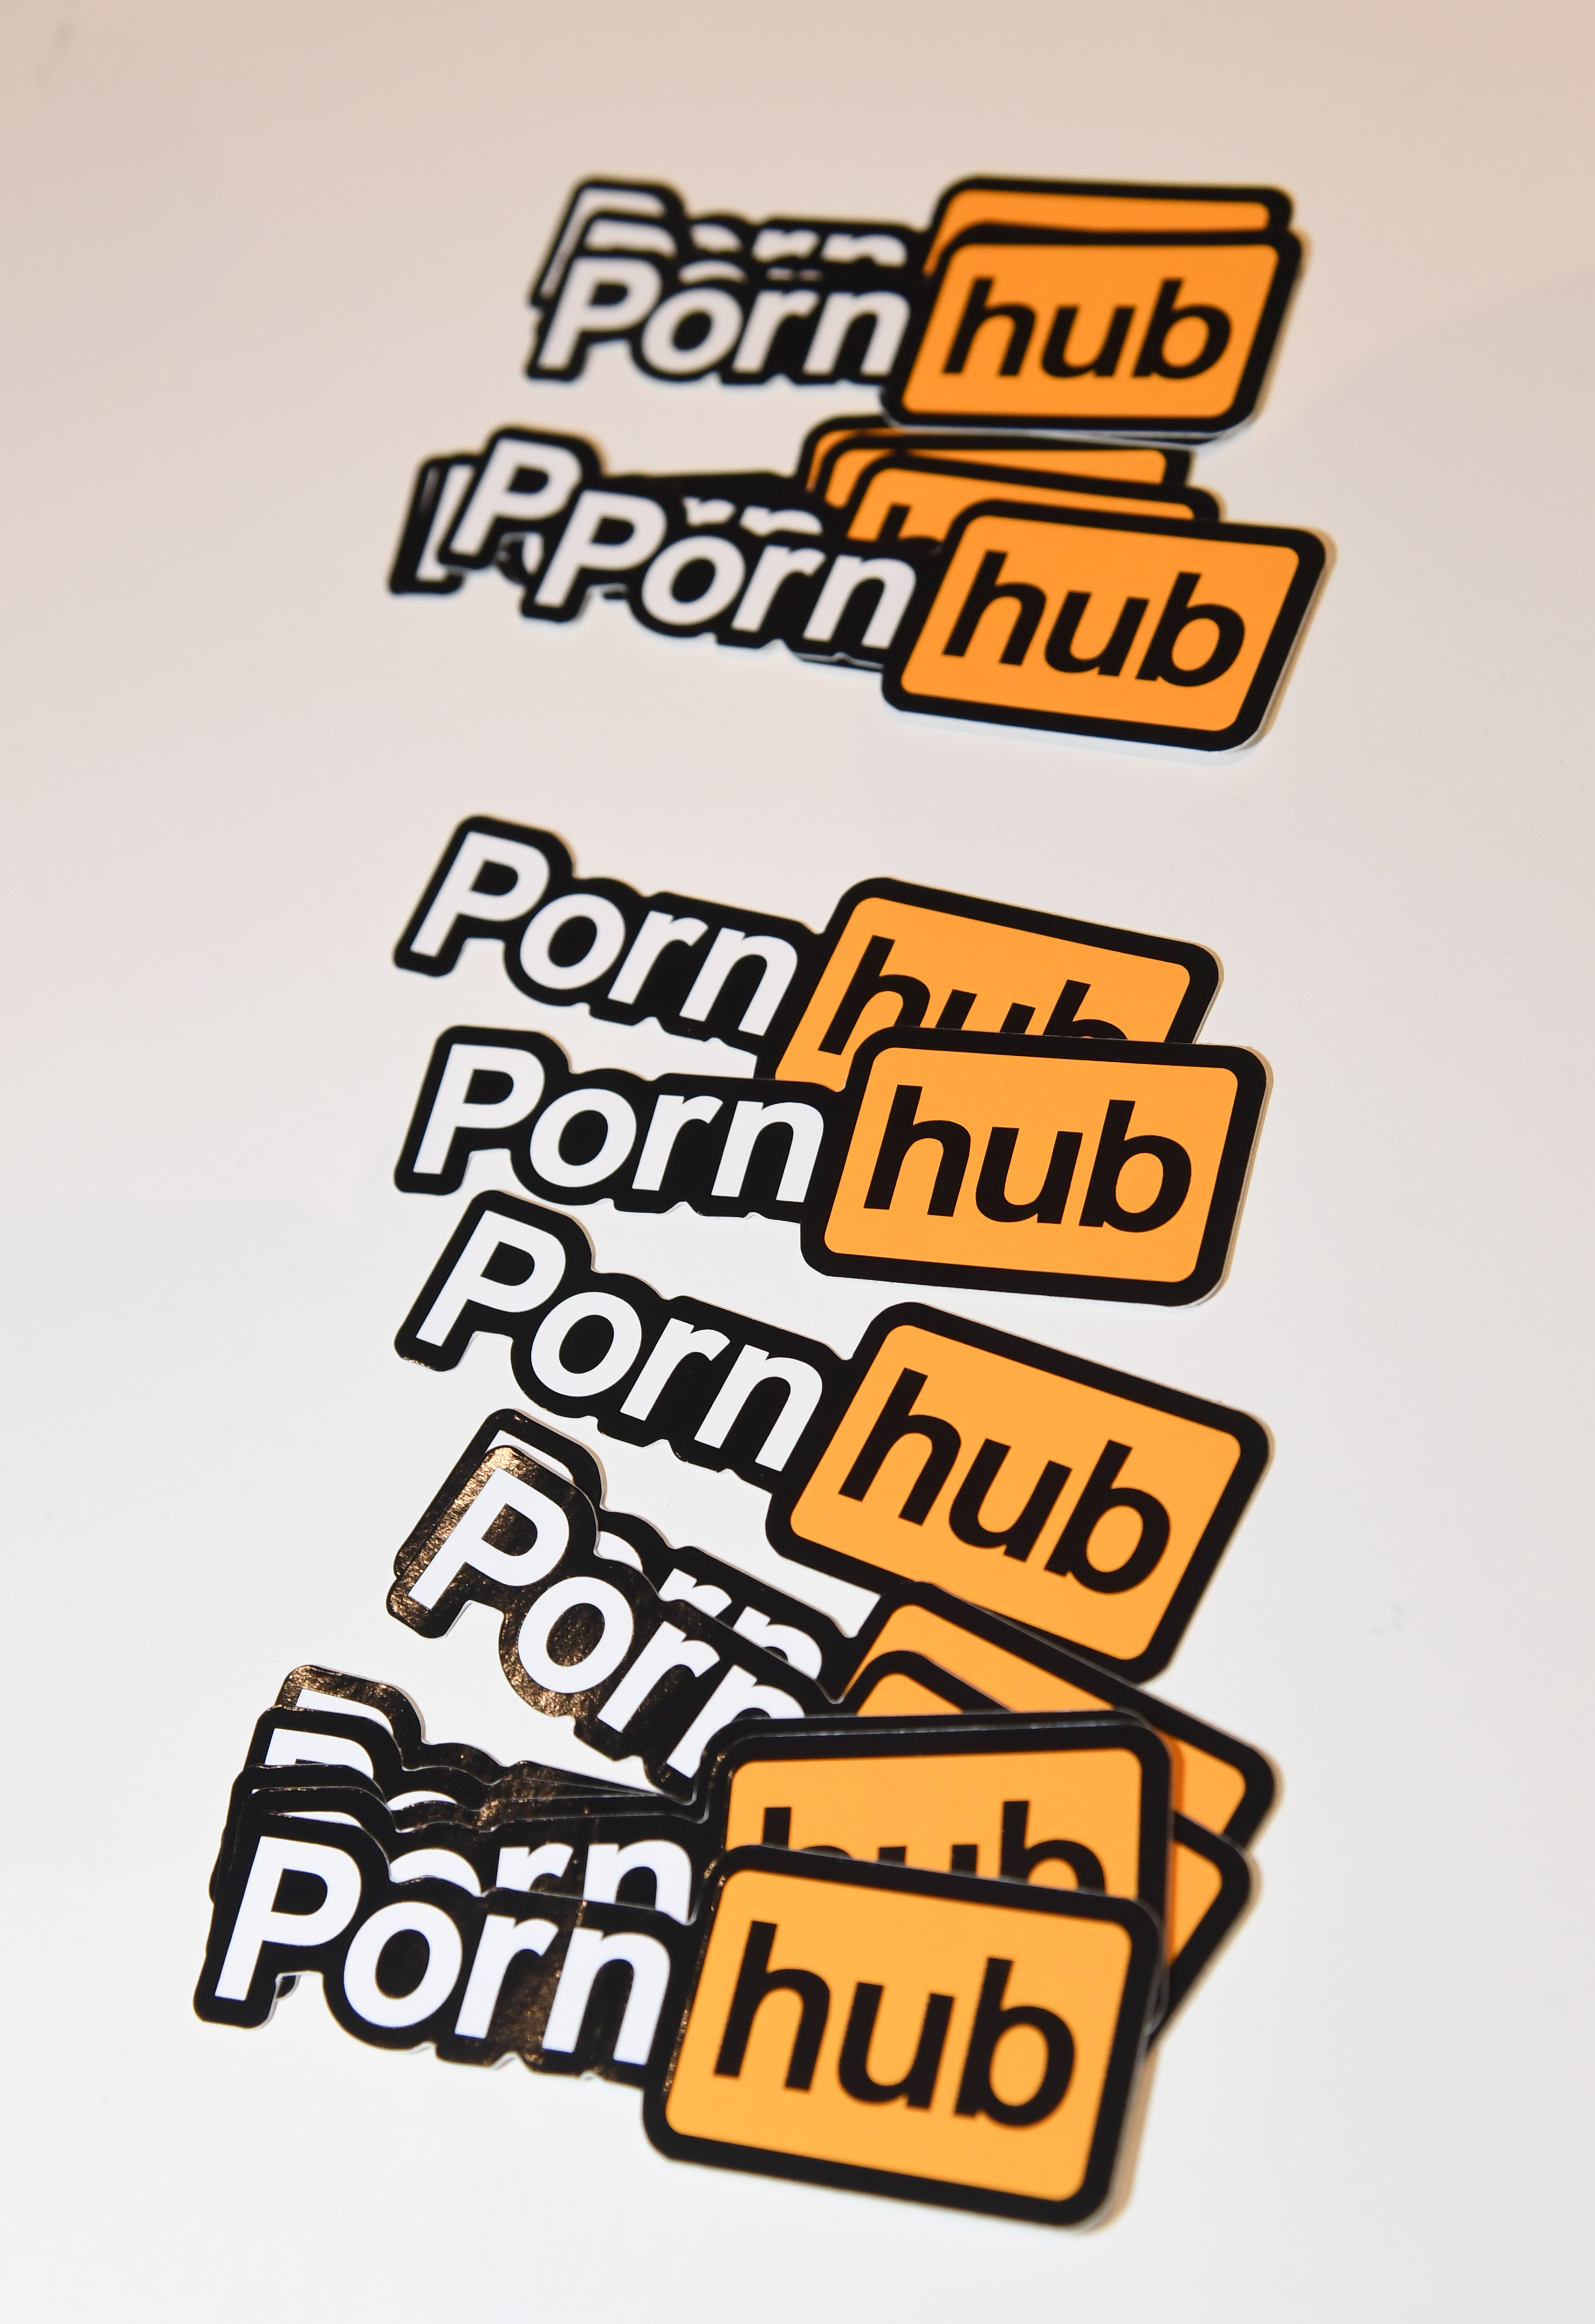 Pornhub Just Purged All Unverified Content From the Platform